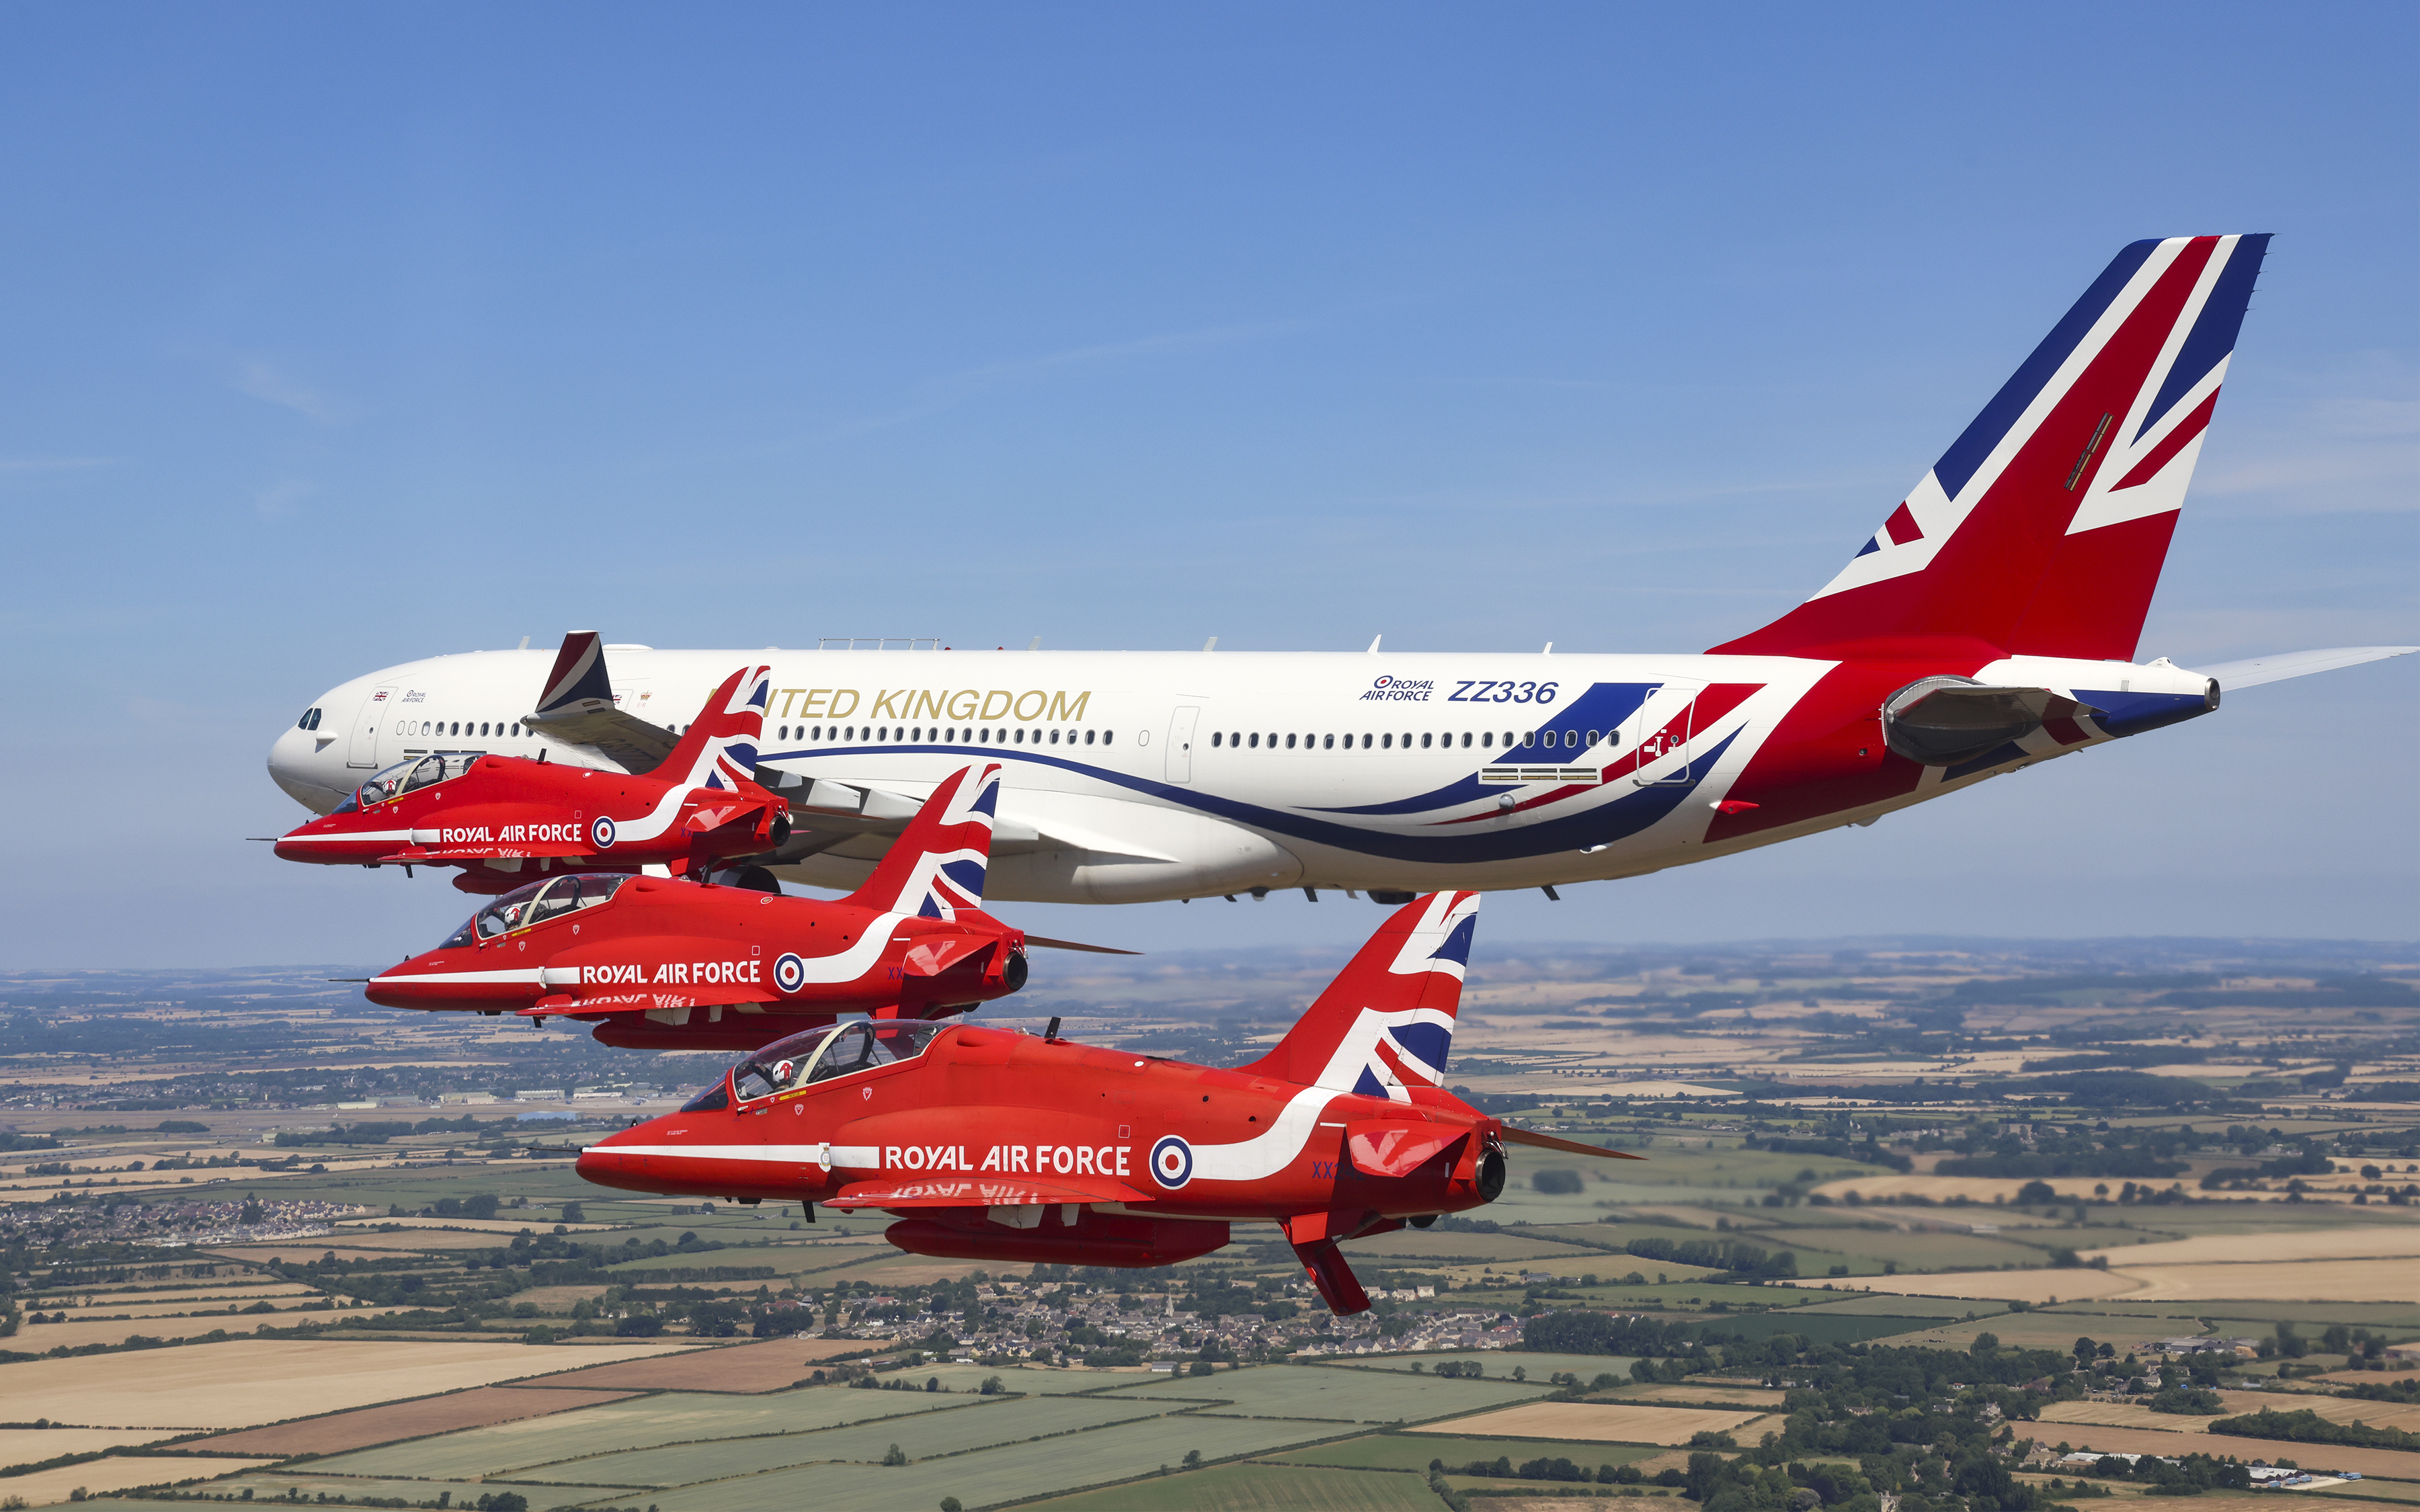 The Red Arrows support a range of UK interests at home and overseas.